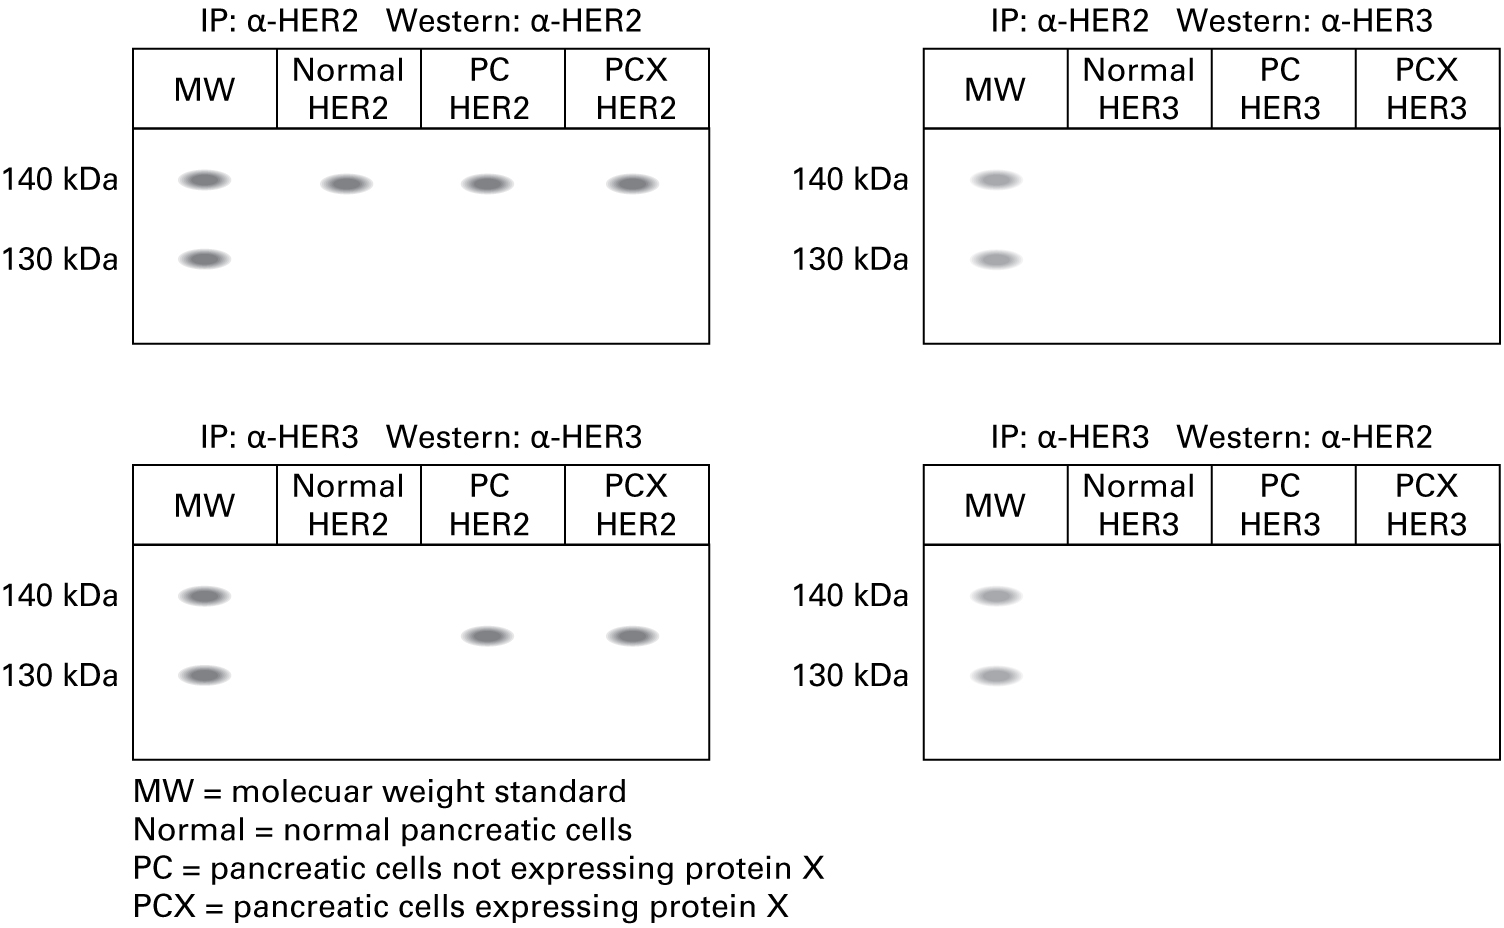 Immunoprecipitation using the anti-HER2 antibody, followed by Western blot using the anti-HER2 antibody shows the following lanes and bands: Normal pancreatic cells: band approximately 138 kDa Pancreatic cells not expressing protein X: band approximately 138 kDa Pancreatic cells expressing protein X: band approximately 138 kDa Immunoprecipitation using the anti-HER2 antibody, followed by Western blot using the anti-HER3 antibody shows the following lanes and bands: Normal pancreatic cells: no band  Pancreatic cells not expressing protein X: no band Pancreatic cells expressing protein X: no band  Immunoprecipitation using the anti-HER3 antibody, followed by Western blot using the anti-HER3 antibody shows the following lanes and bands: Normal pancreatic cells: band approximately 135 kDa Pancreatic cells not expressing protein X: band approximately 135 kDa Pancreatic cells expressing protein X: band approximately 135 kDa Immunoprecipitation using the anti-HER3 antibody, followed by Western blot using the anti-HER2 antibody shows the following lanes and bands: Normal pancreatic cells: no band  Pancreatic cells not expressing protein X: no band  Pancreatic cells expressing protein X: no band  